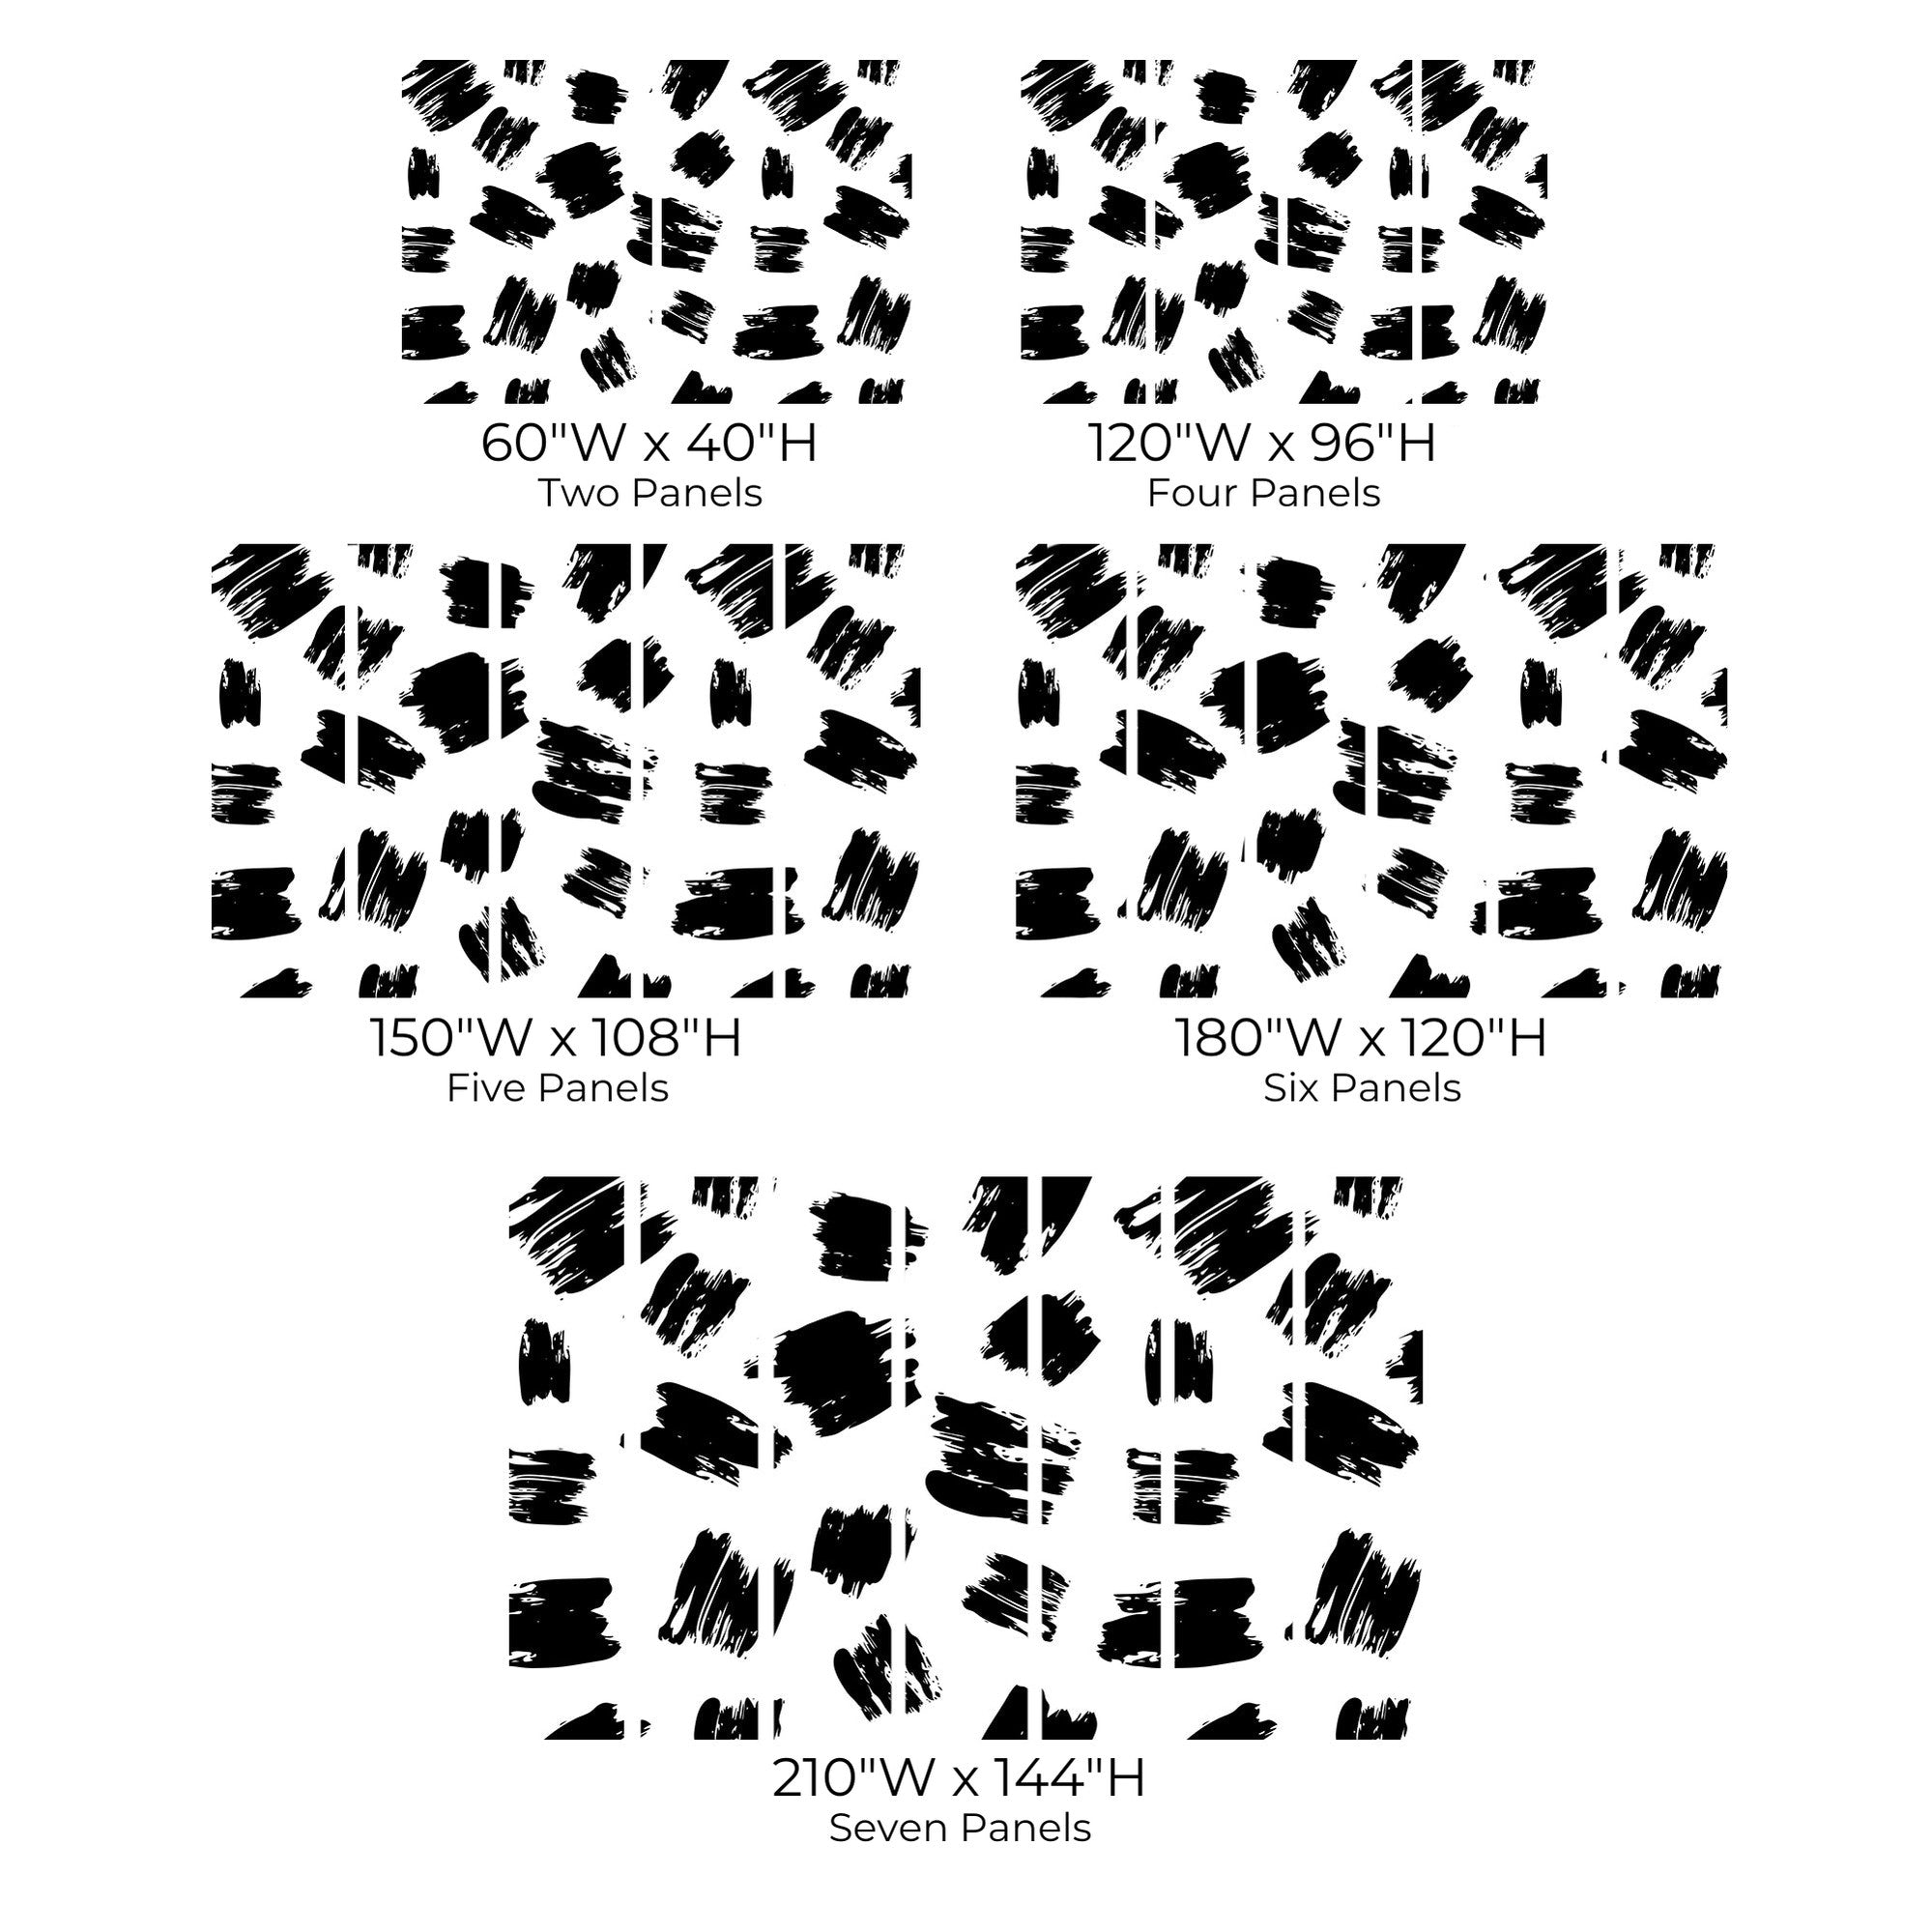 Various sizes of a seven-panel wall mural featuring abstract black brushstrokes on a white background displayed in a sizing chart format.